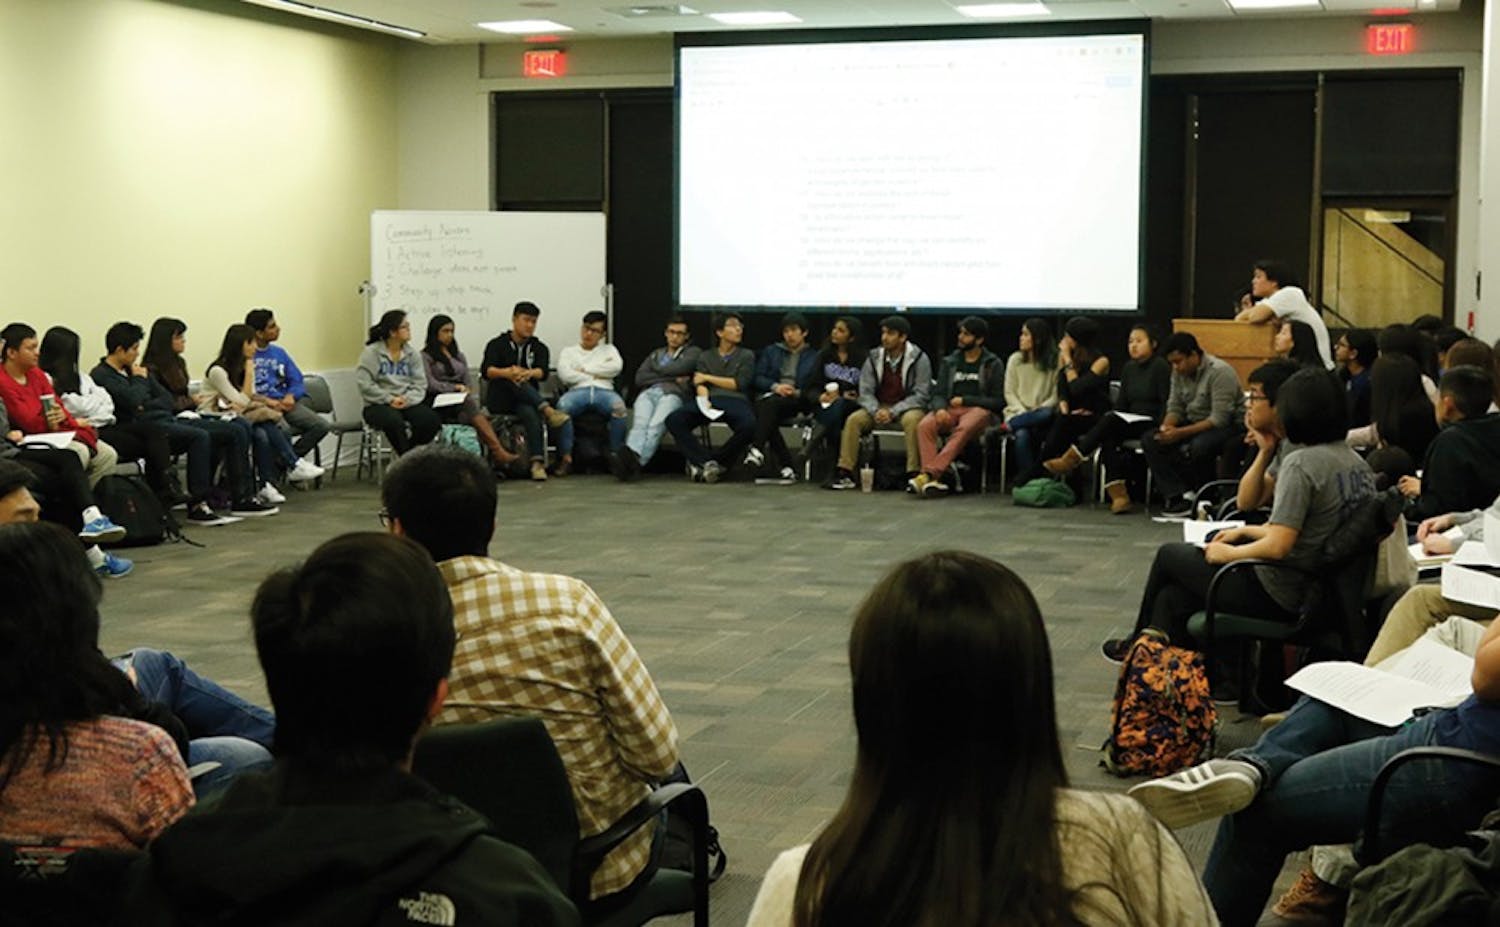 Members of the Asian community at Duke discussed issues ranging from&nbsp;the portrayal of Asians in the media to generational divides.